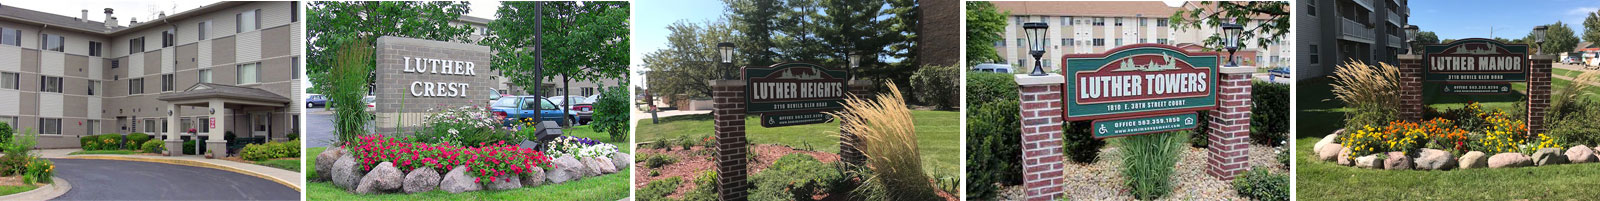 Five piece banner photo showcasing Luther Knoll, Luther Crest, Luther Heights, Luther Towers, and Luther Manor